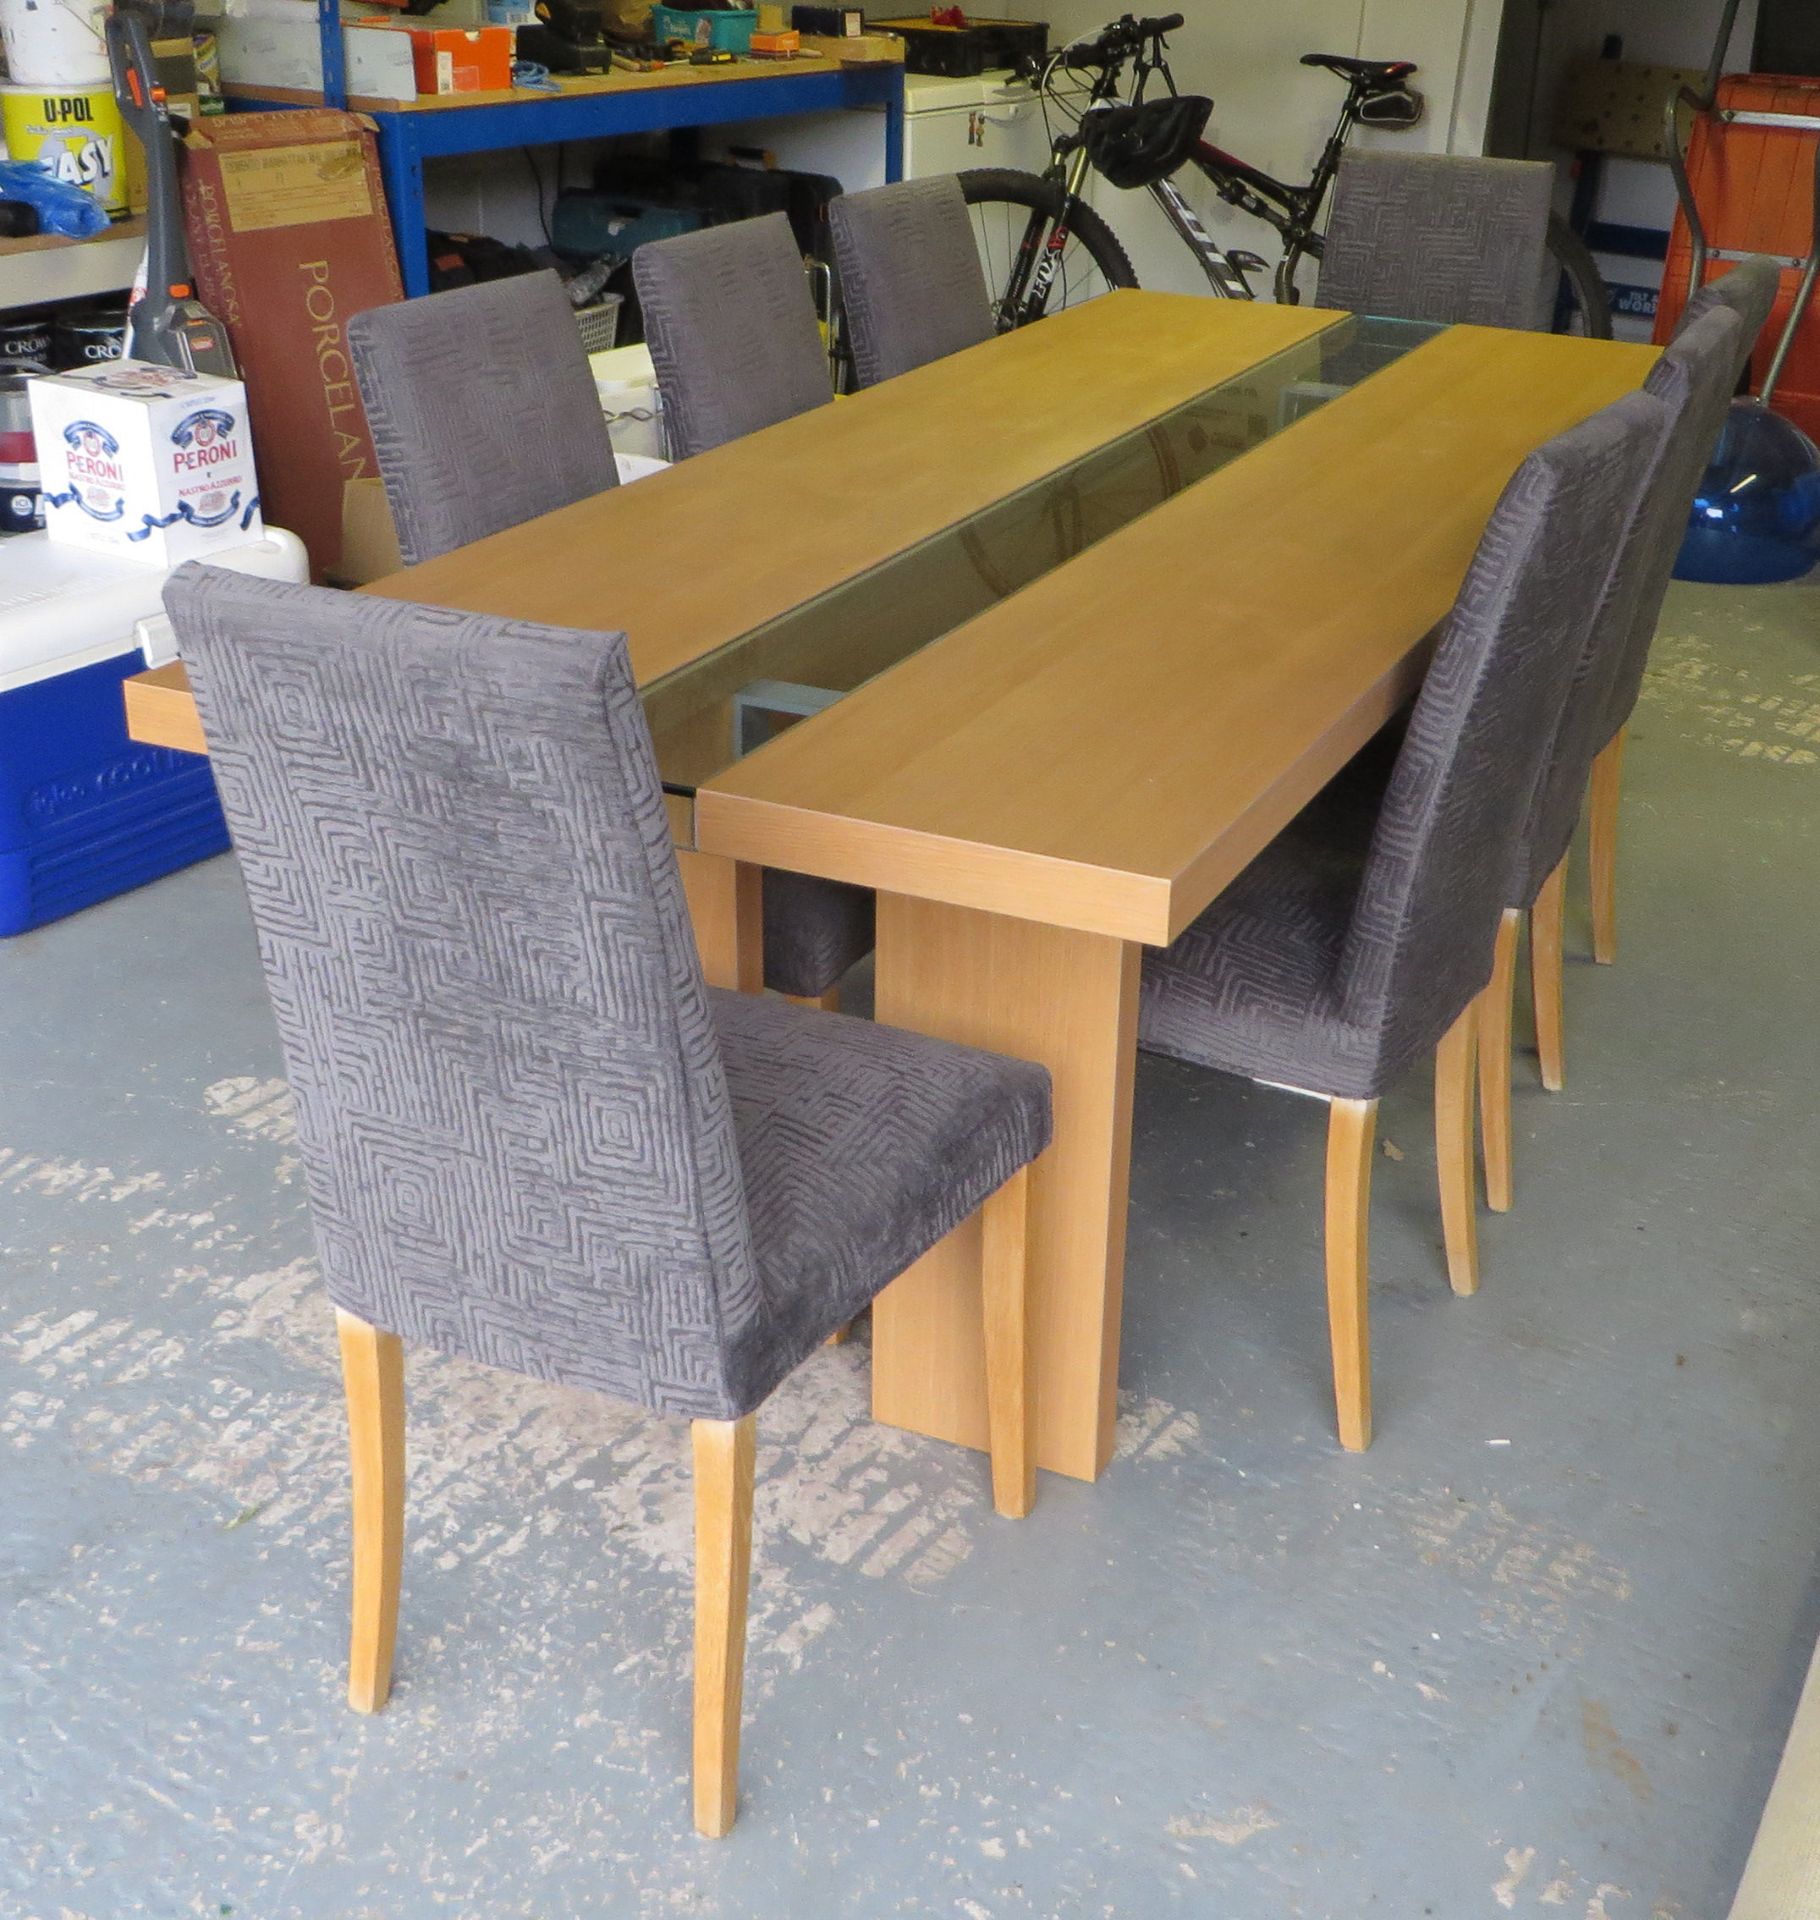 1 x Natural Oak Bross Ritz Dining Table and 8 Ligne Roset Dining Chairs - All in Excellent Condition